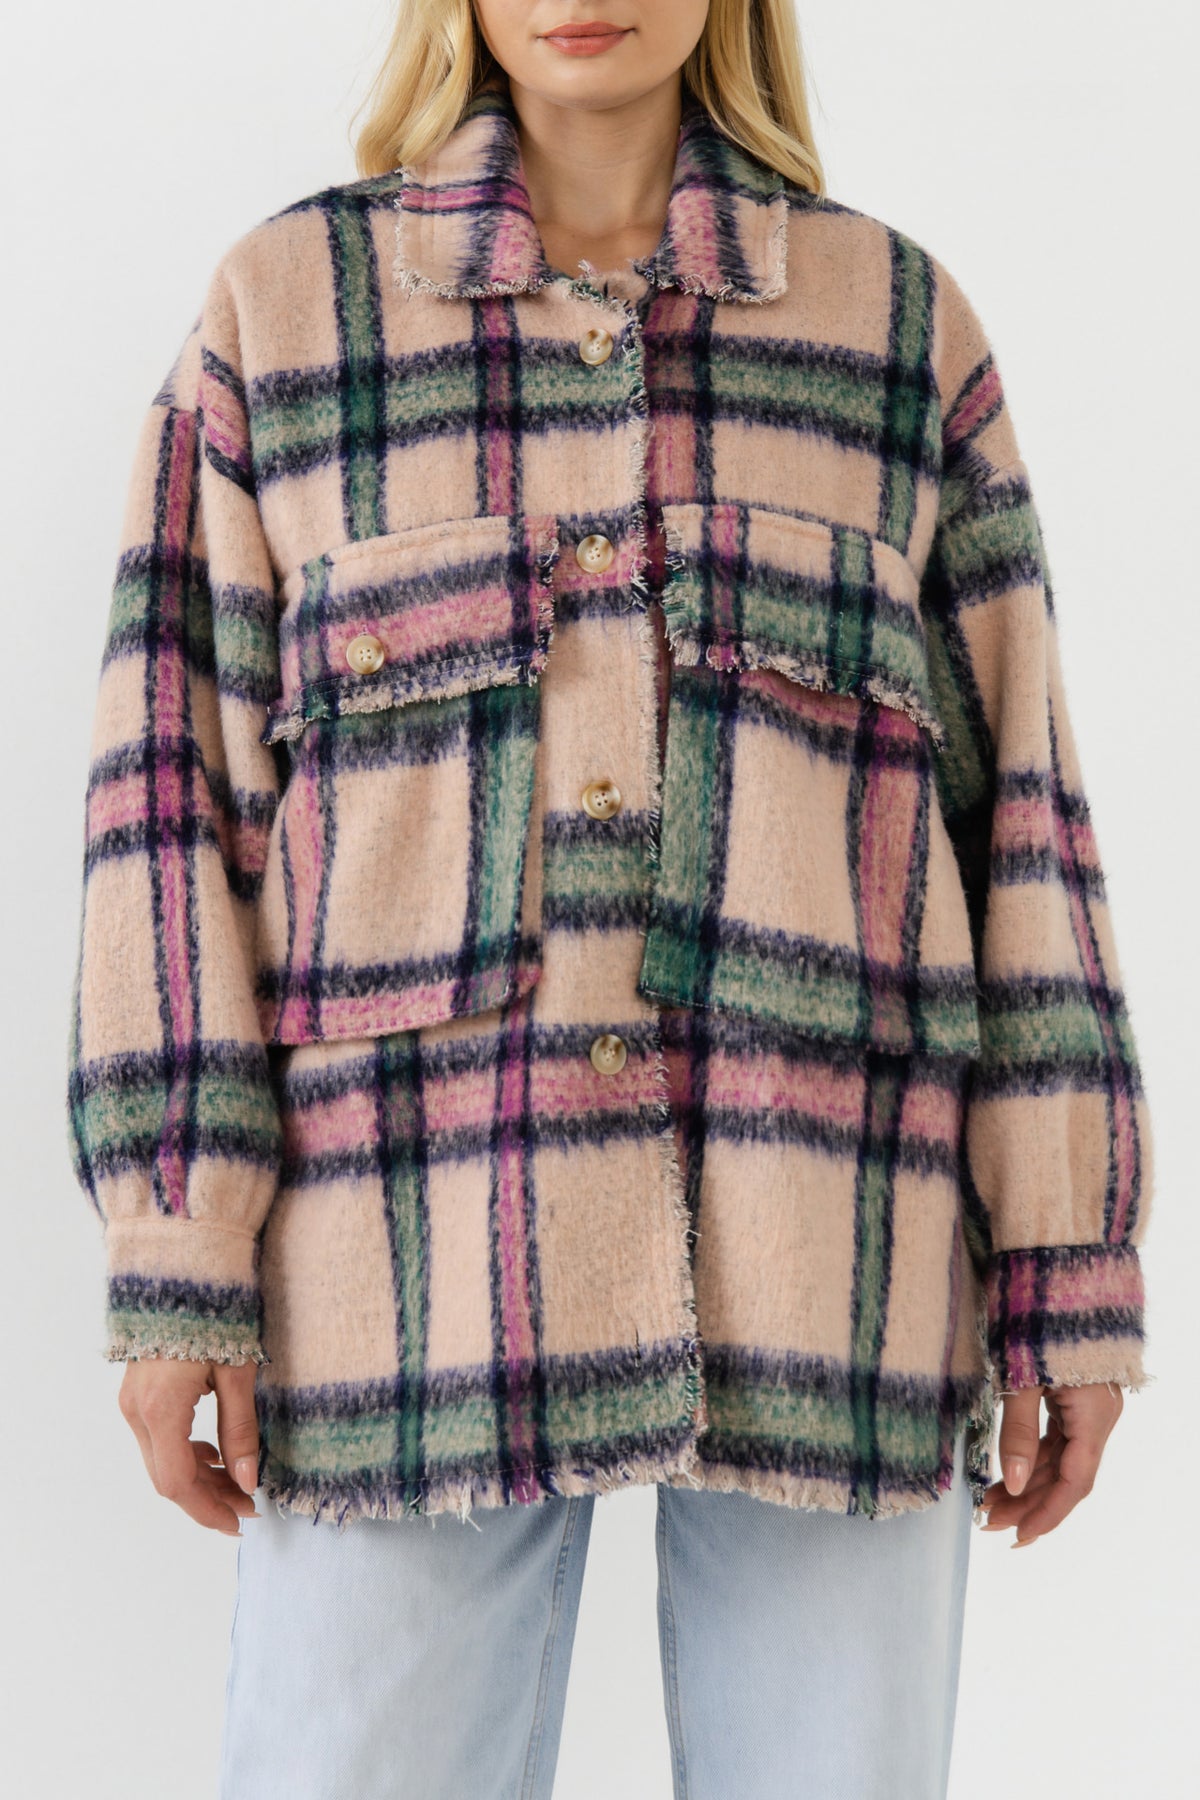 FREE THE ROSES - Oversized Plaid Coat with Raw Edges - JACKETS available at Objectrare